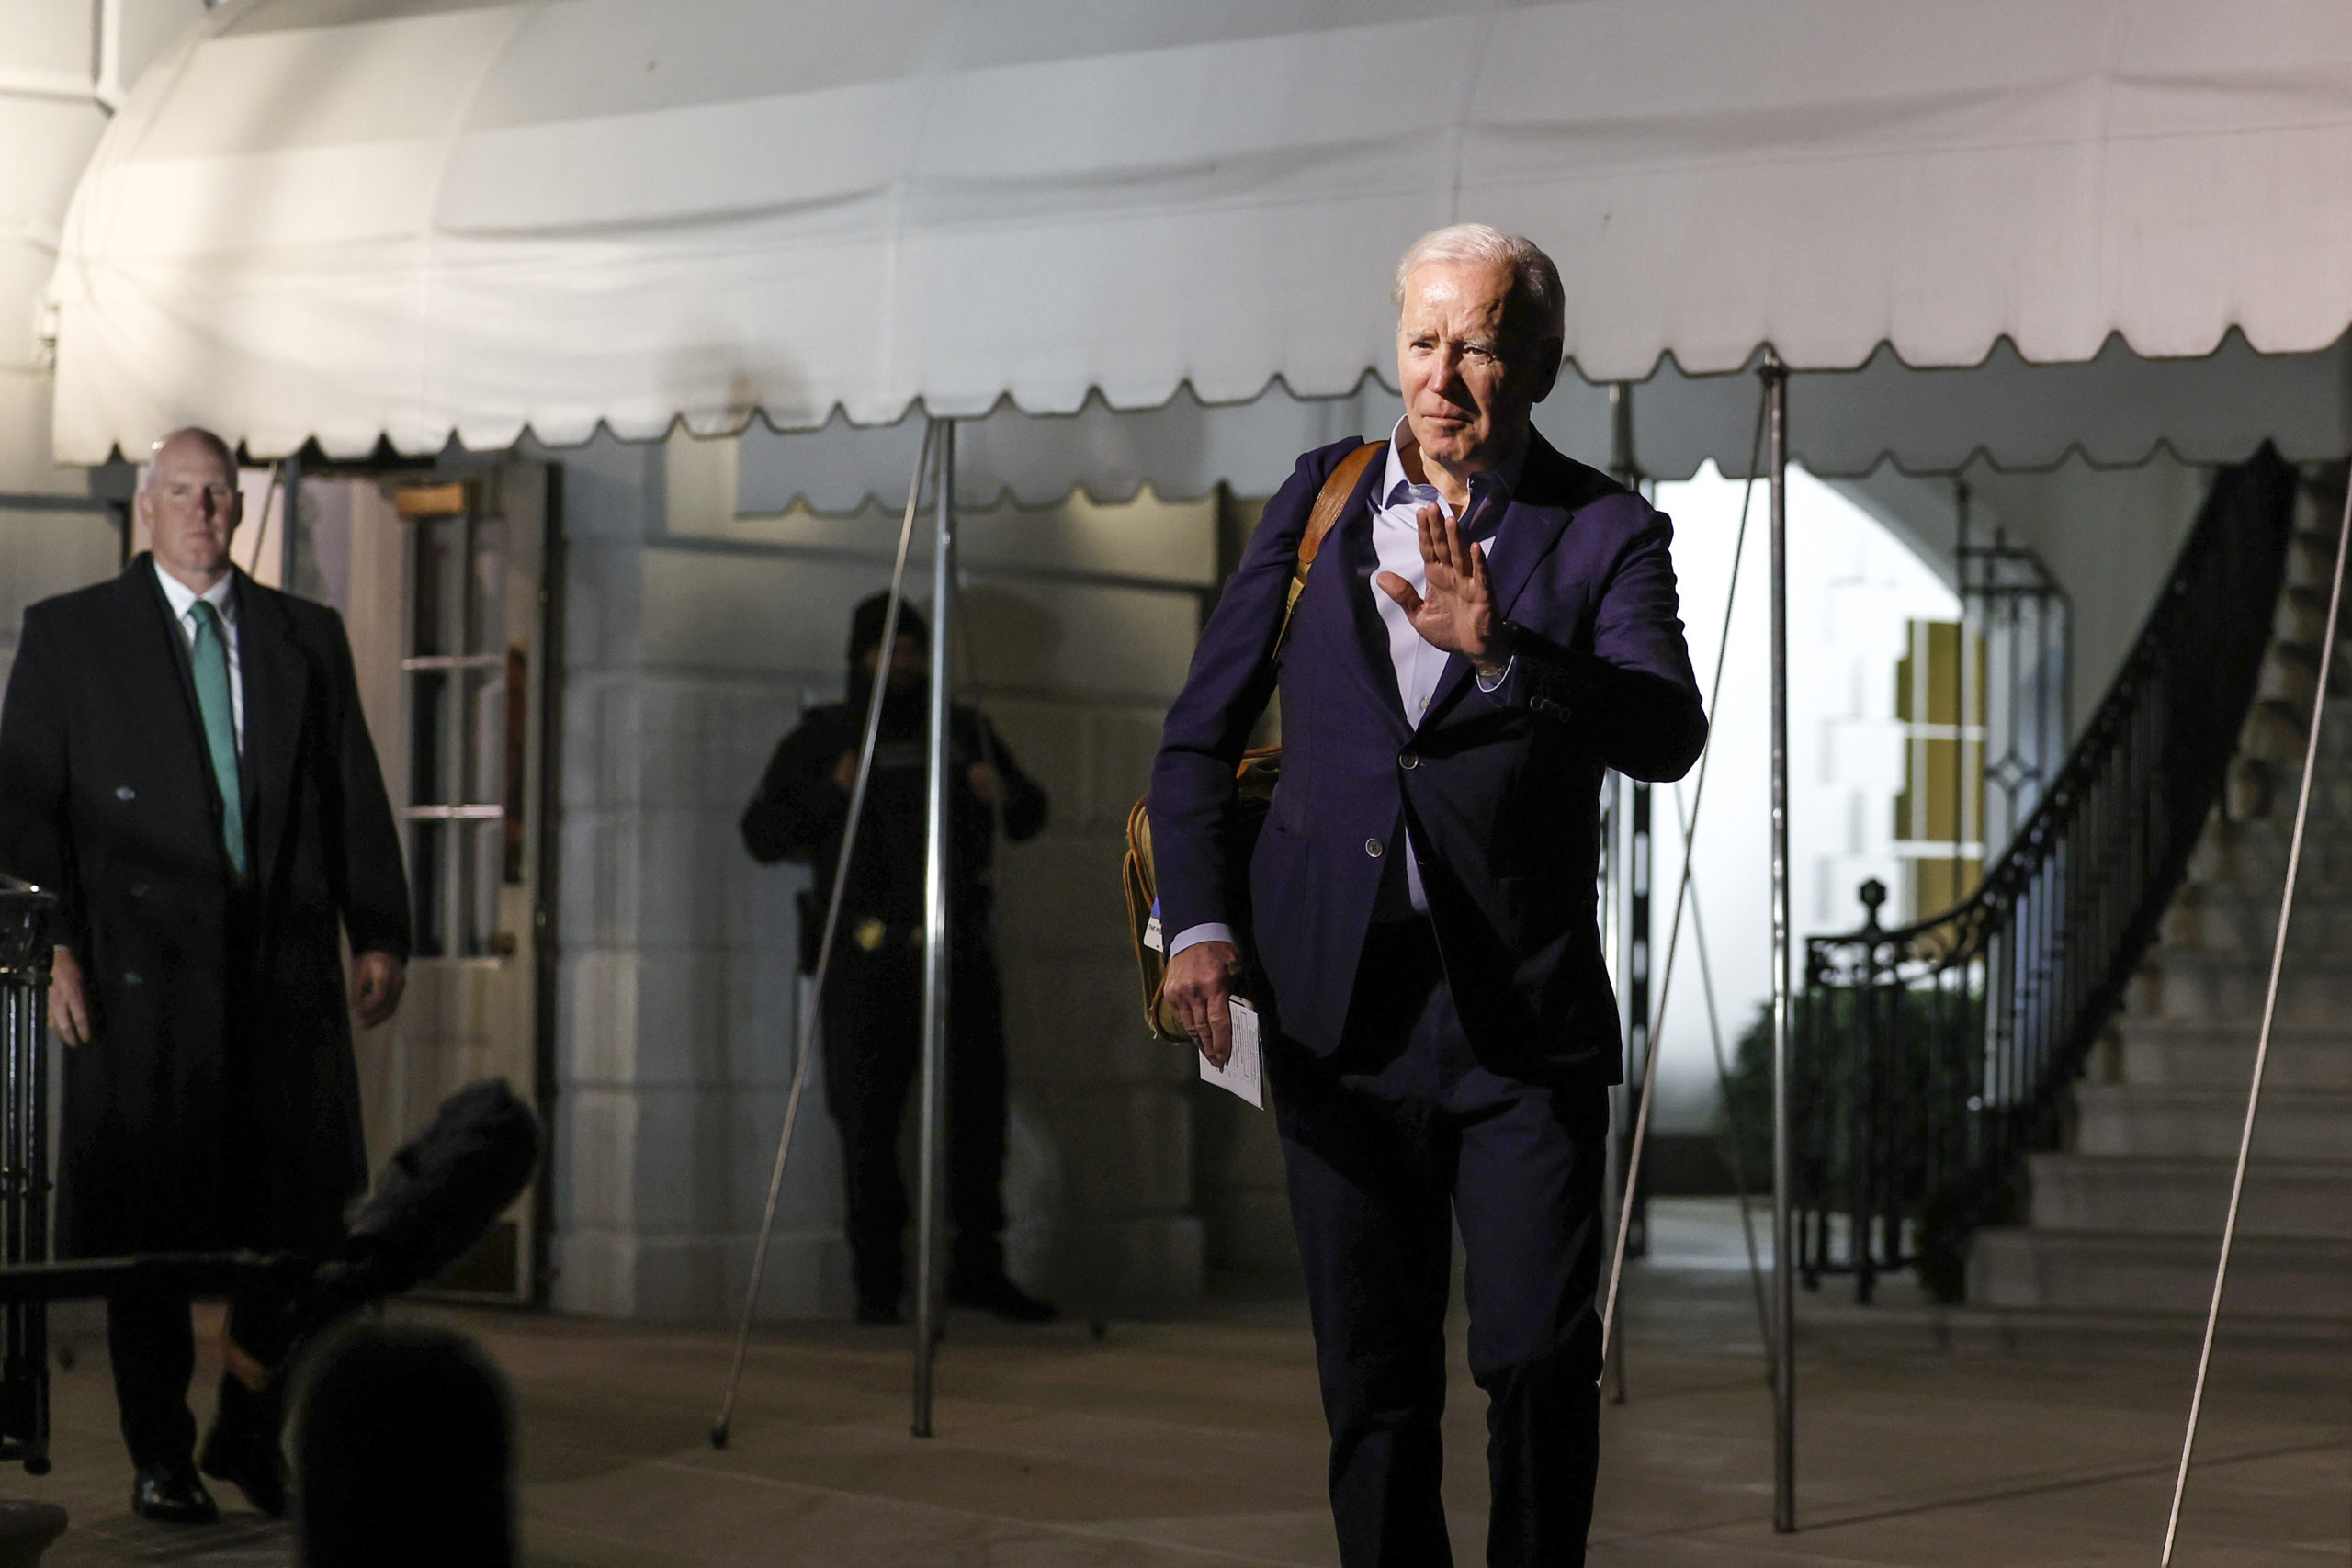 U.S. President Joe Biden walks to speak to reporters as he and first lady Jill Biden leave the White House and walk to Marine One on the South Lawn on December 27, 2022 in Washington, DC. The Bidens are spending the New Years holiday in St. Croix, United States Virgin Islands. (Photo by Anna Moneymaker/Getty Images)